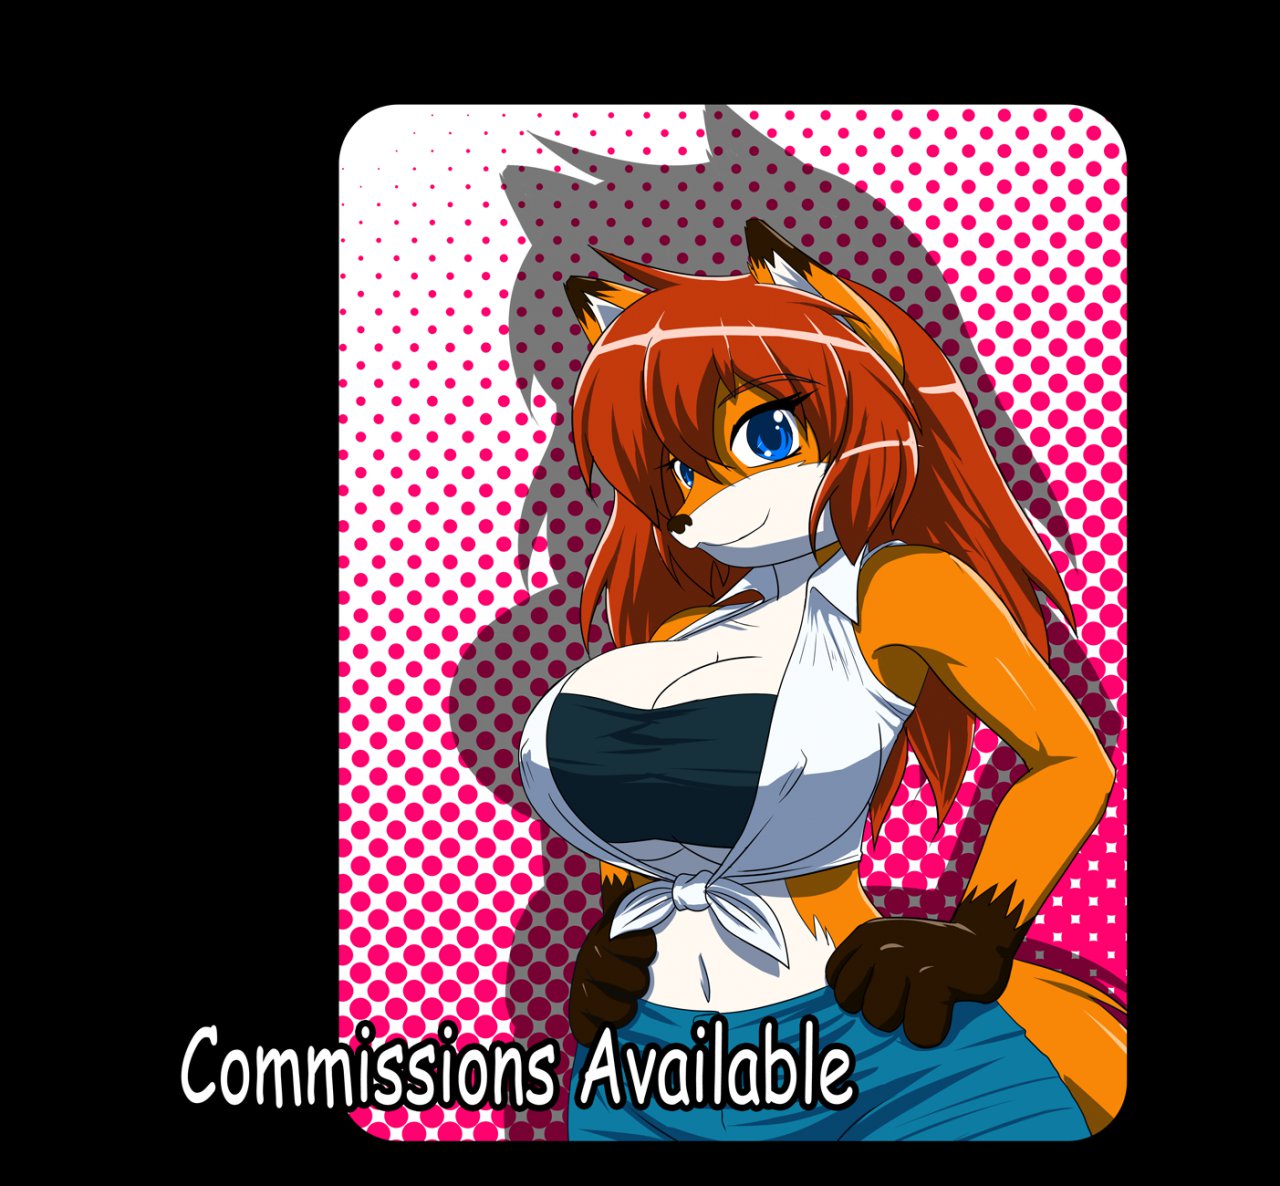 Kojiro Brushard (simple comms open) on X: Furry boobs out of the  commission pile :). Becky has some followers too ya know :P   / X